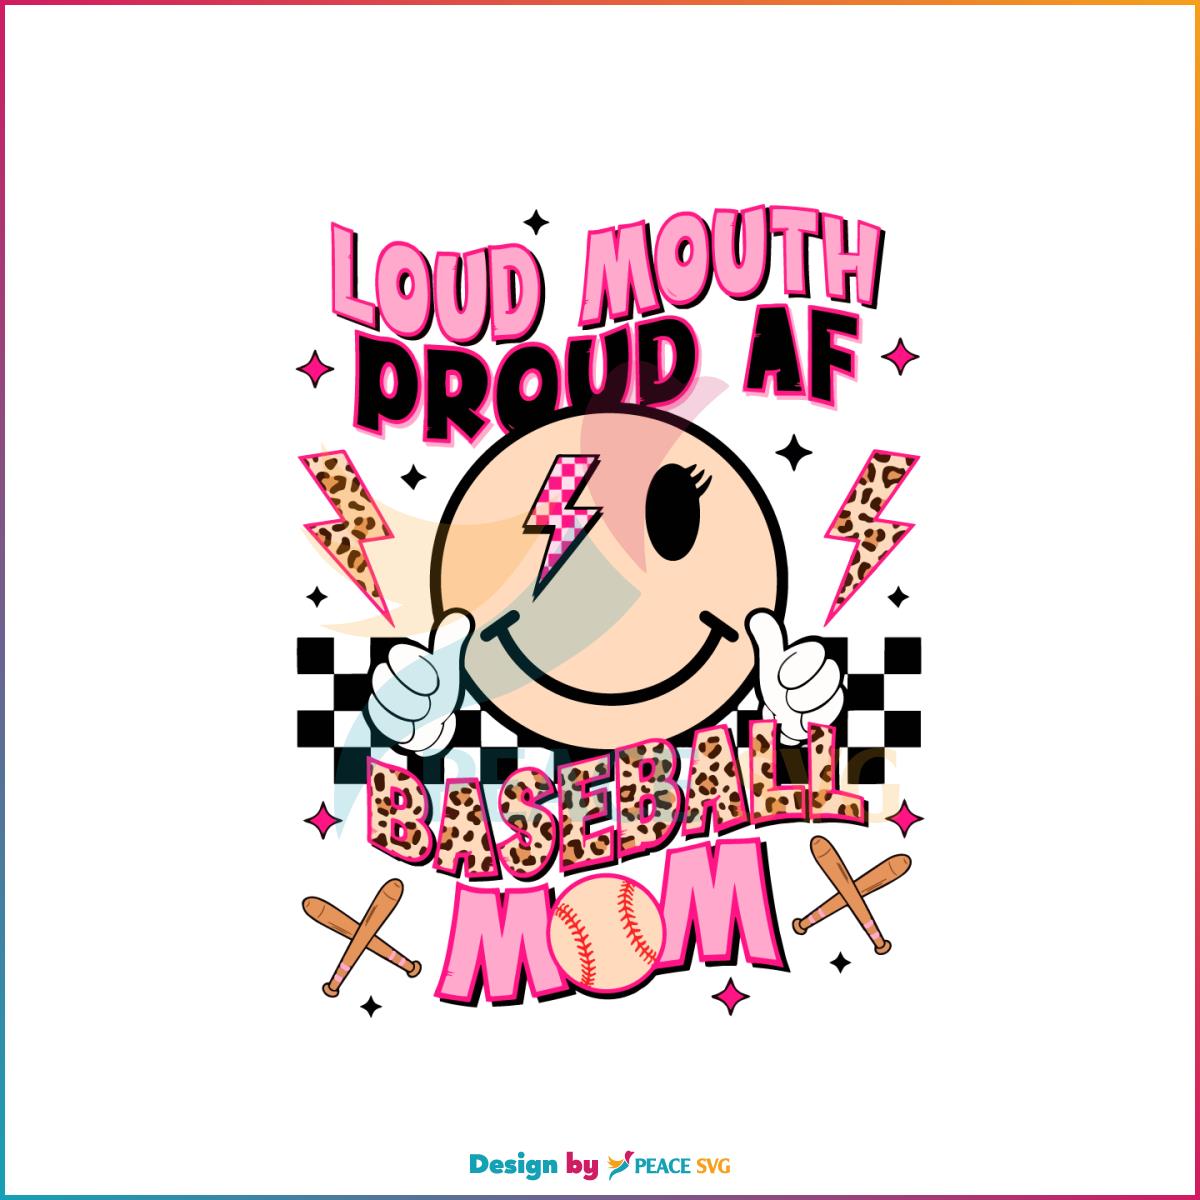 Retro Loud Mouth Proud Af Baseball Mom Bolt Smiley Face SVG Cutting Files